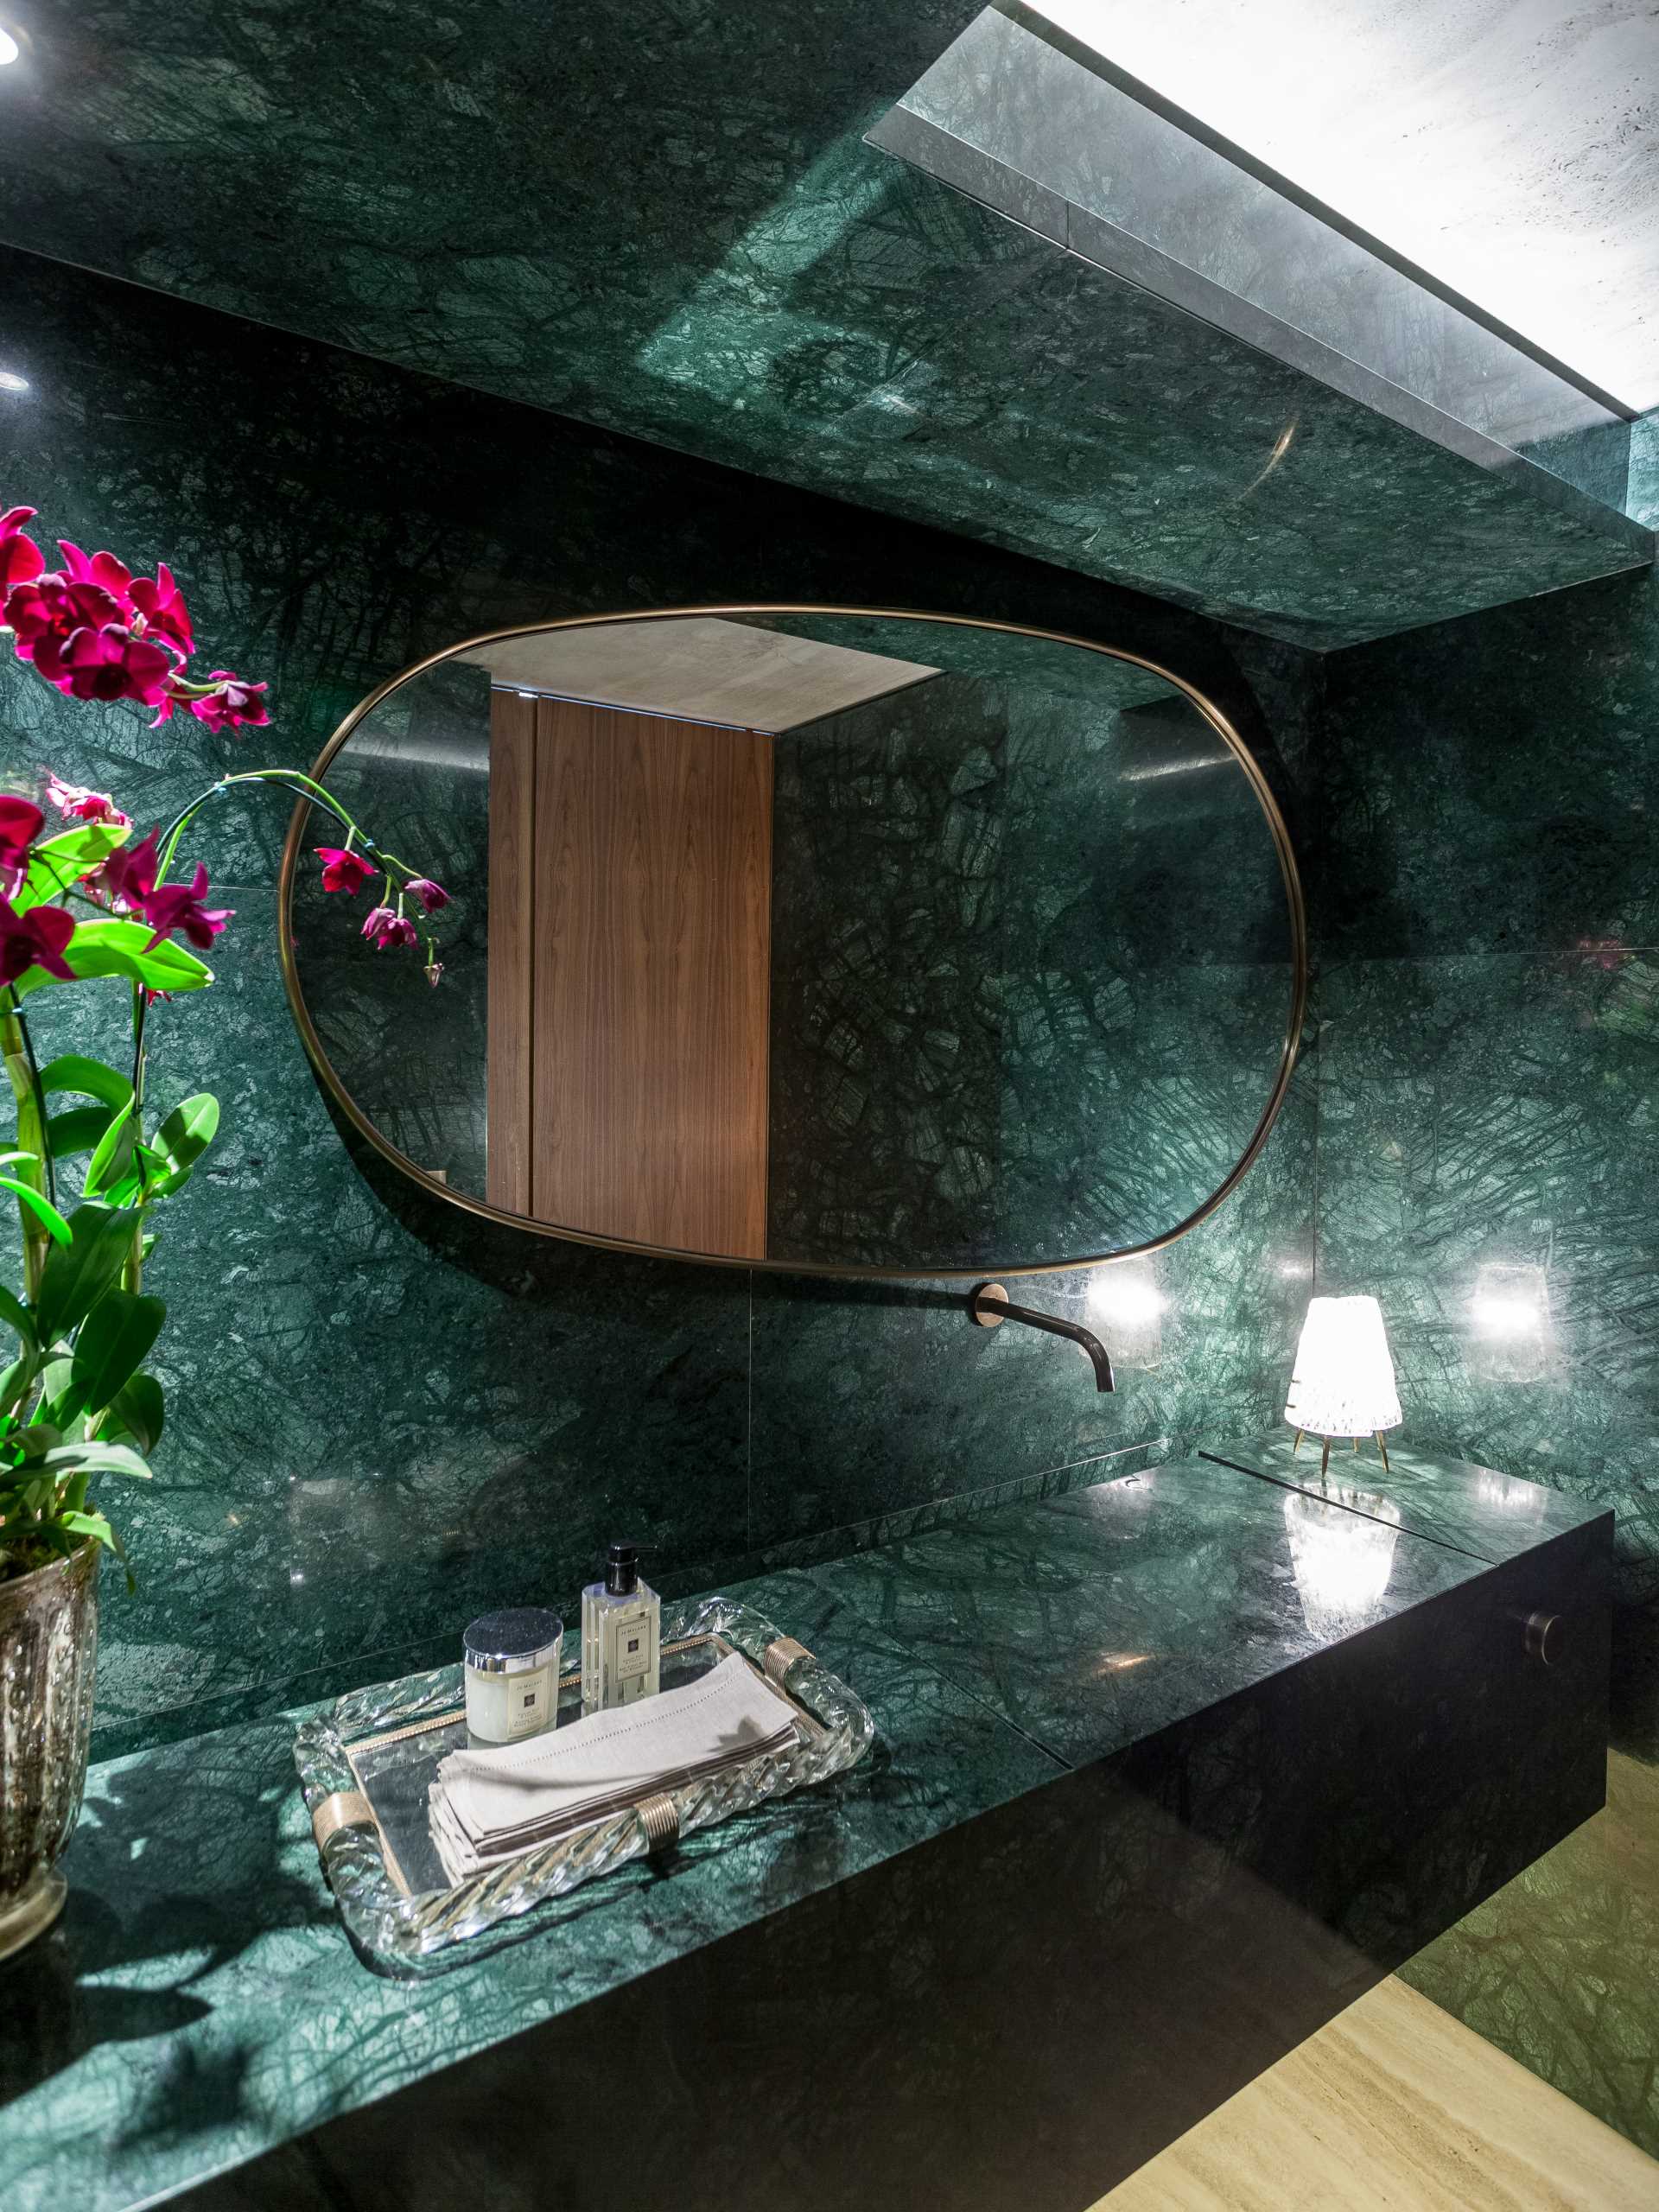 In this bathroom, a Guatemalan green marble was used to line the walls and vanity.